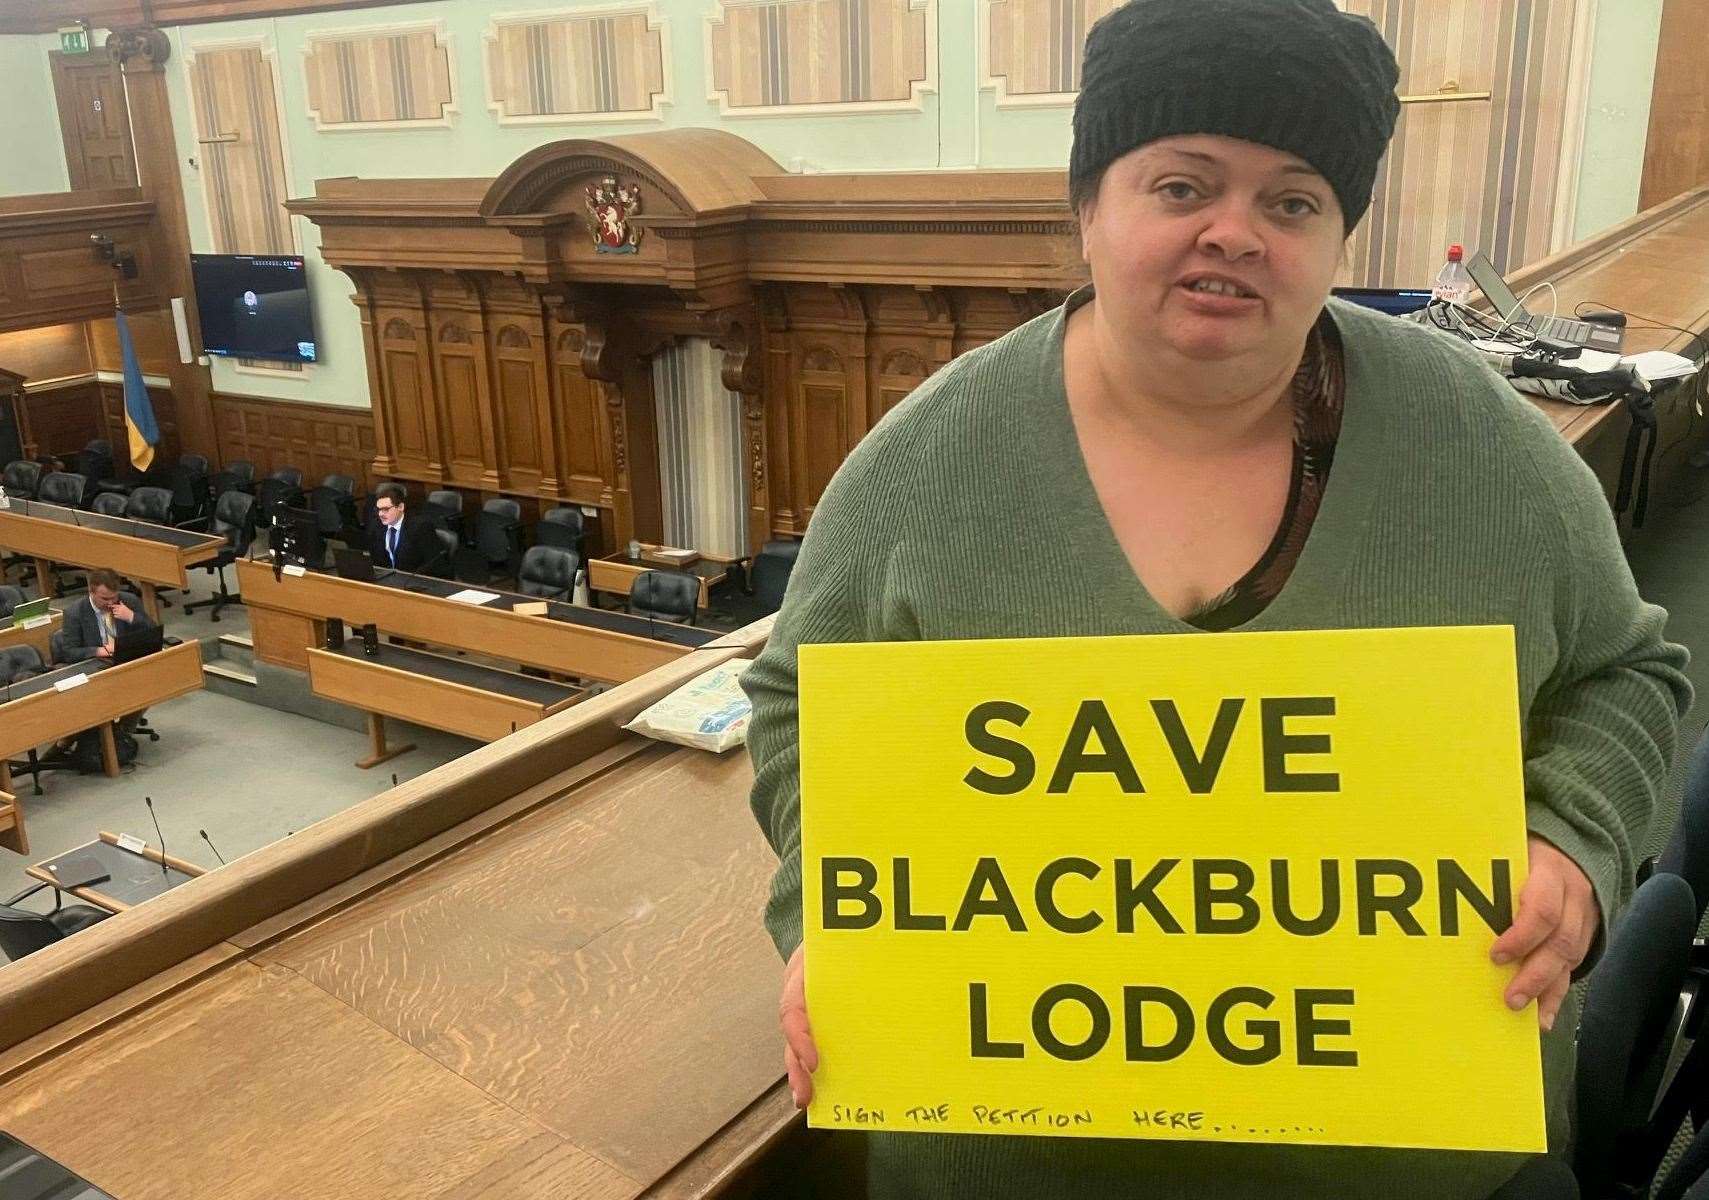 Cllr Dolley Wooster in the chamber at County Hall with her placard demanding Blackburn Lodge is retained